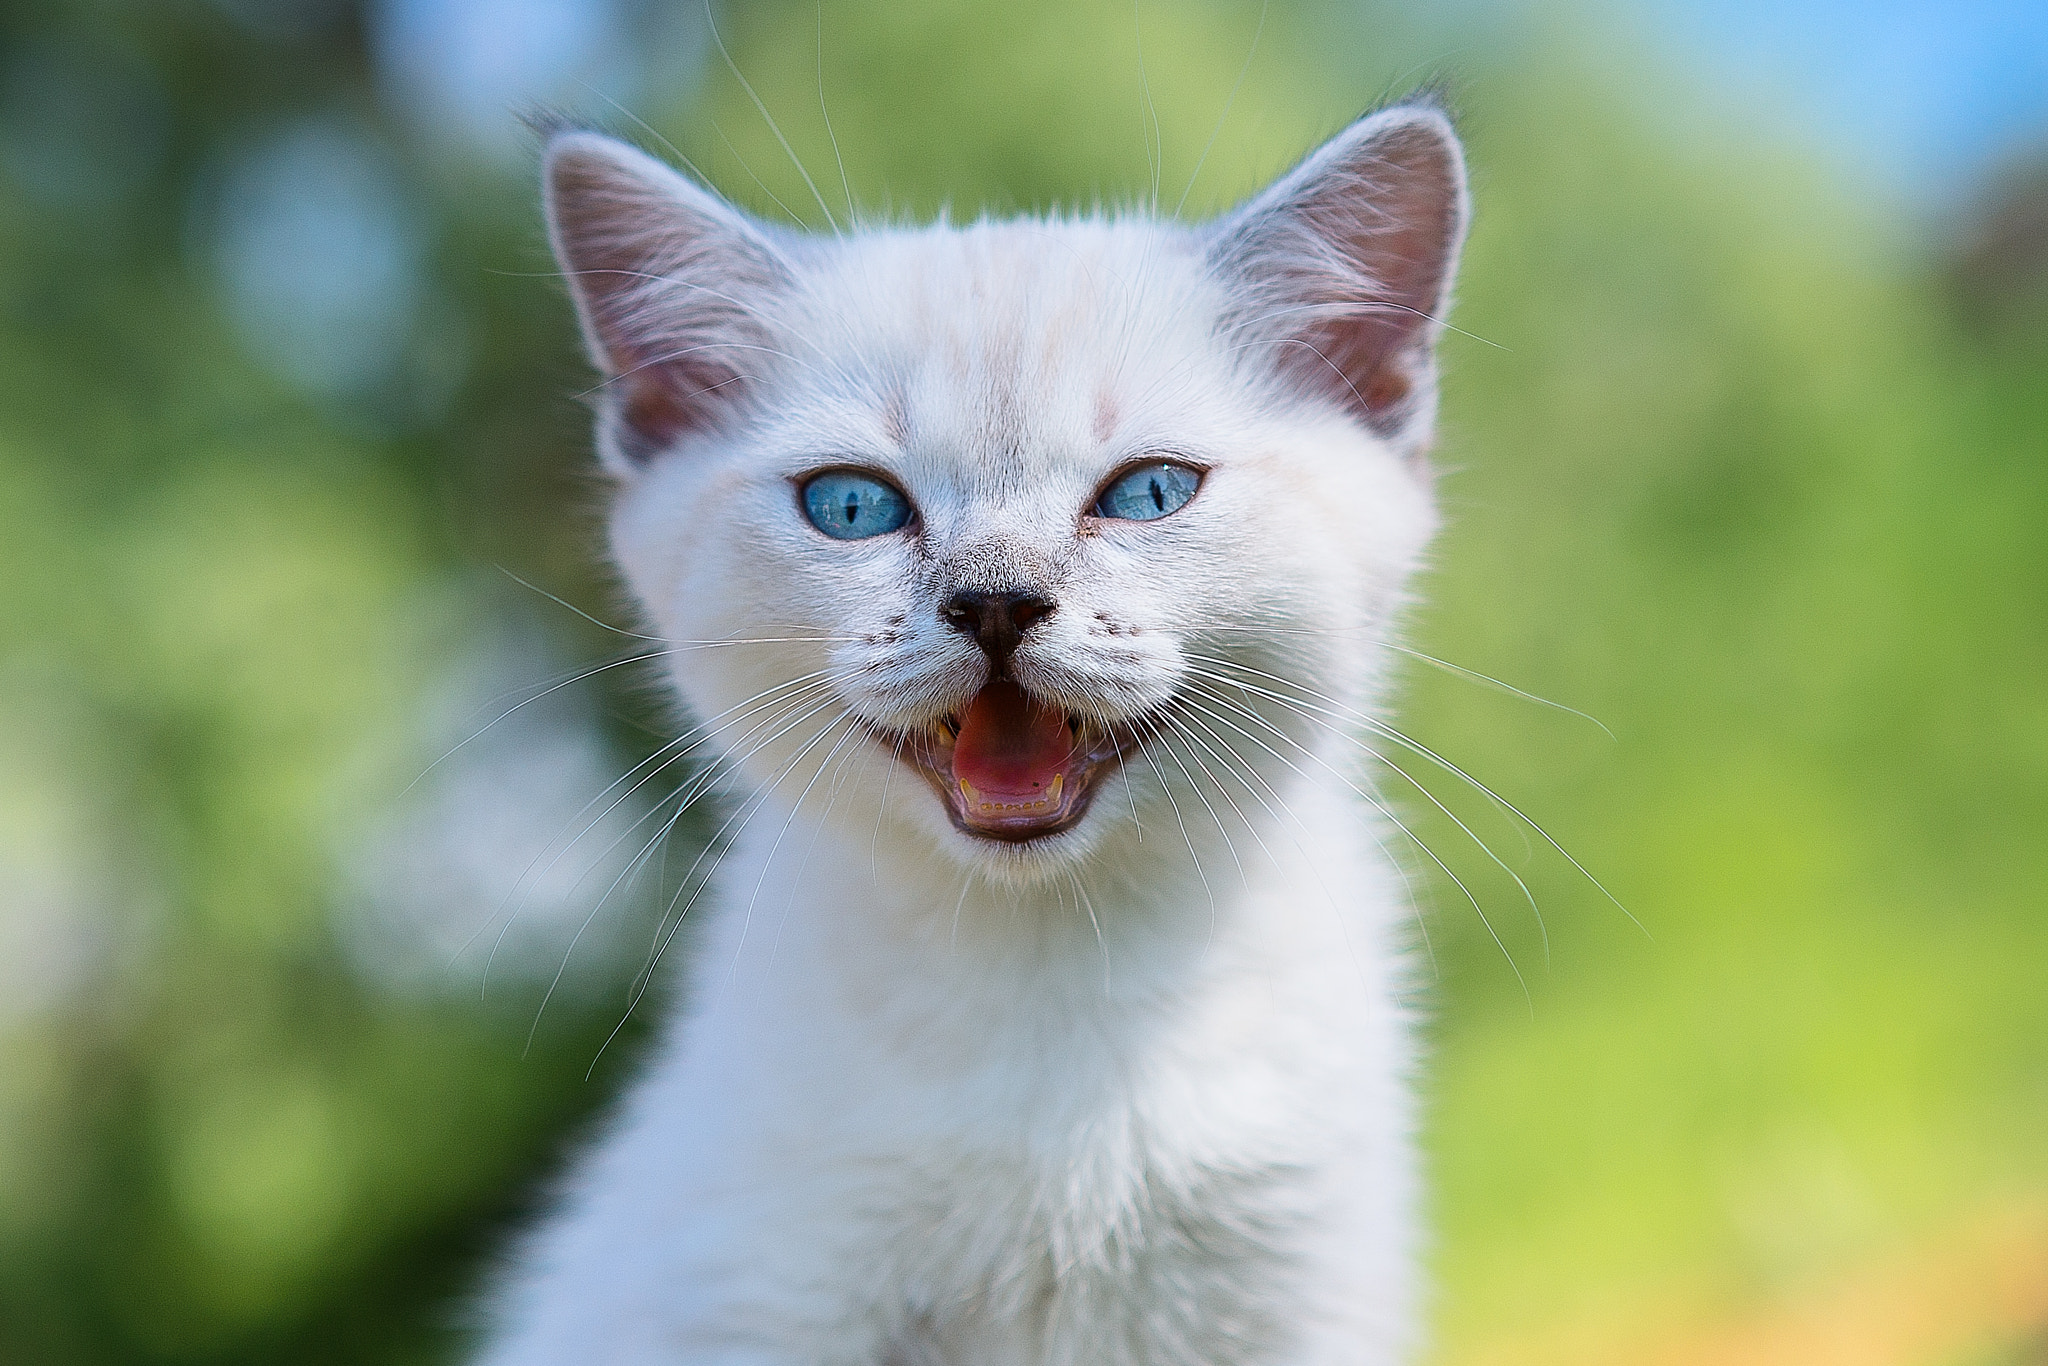 General 2048x1366 cats blue eyes animals feline mammals closeup looking at viewer fur open mouth whiskers blurred blurry background